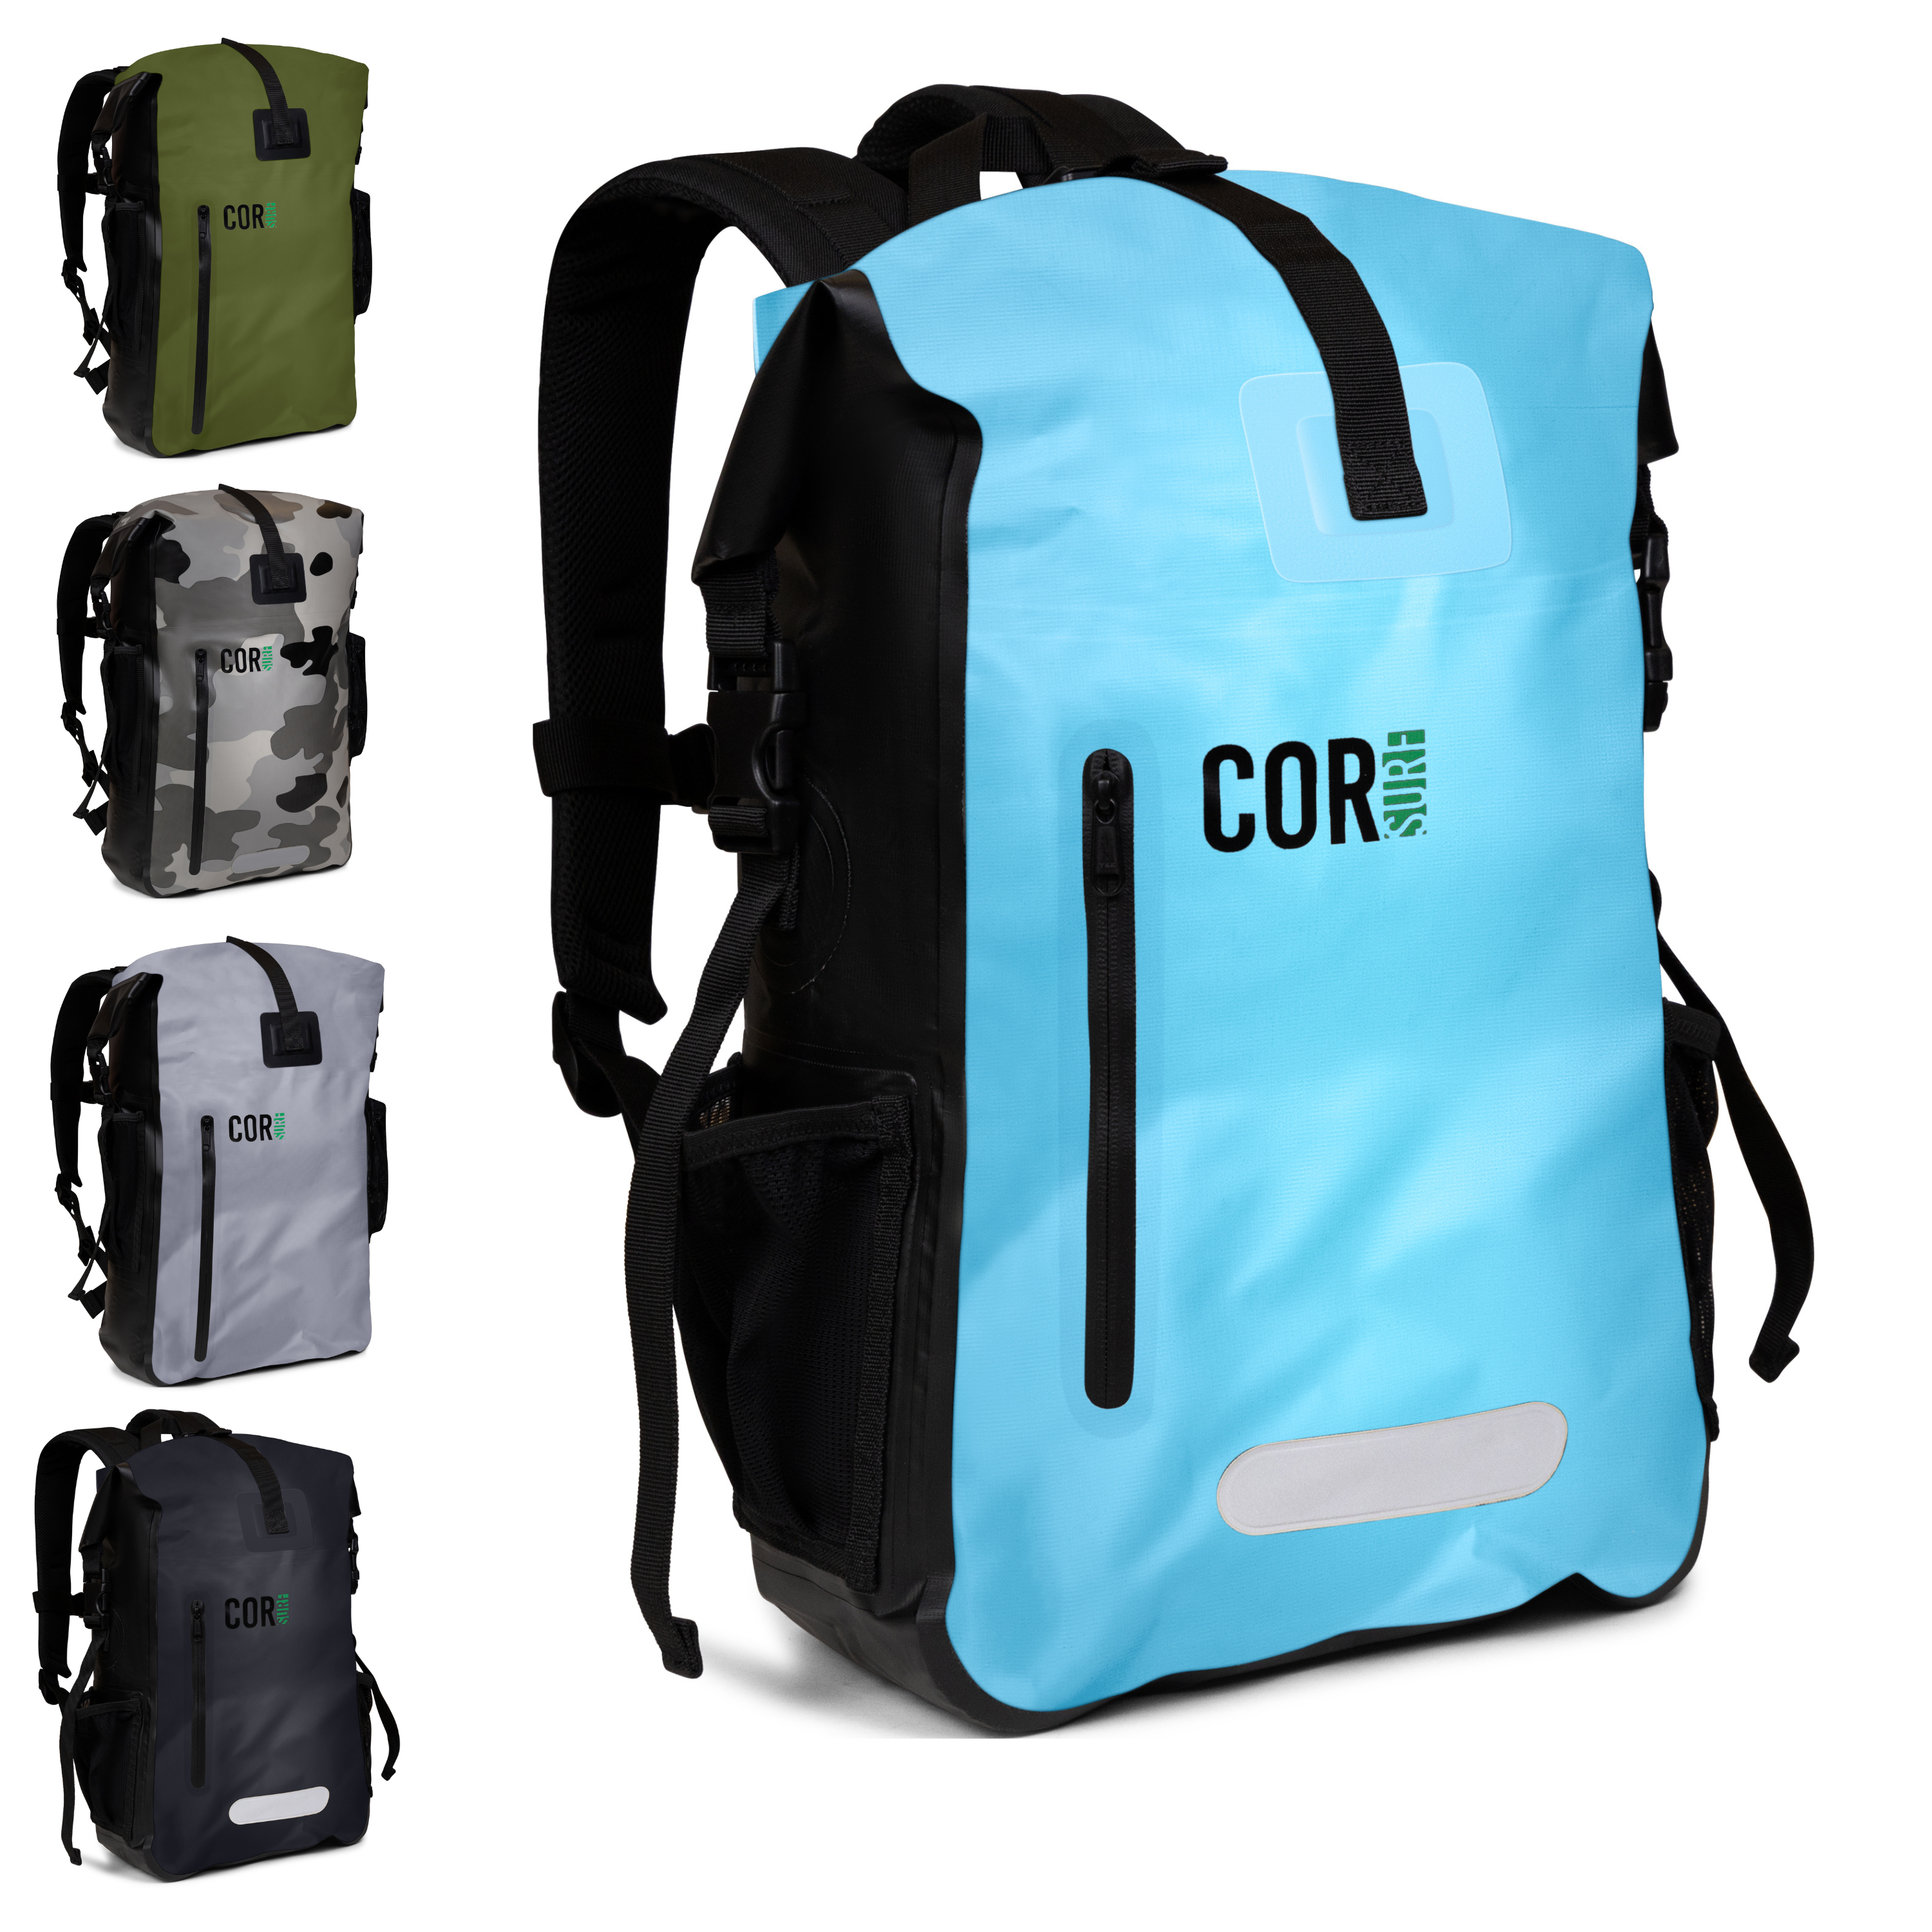 Trekking and Hiking Waterproof Compression Bag - 25 L